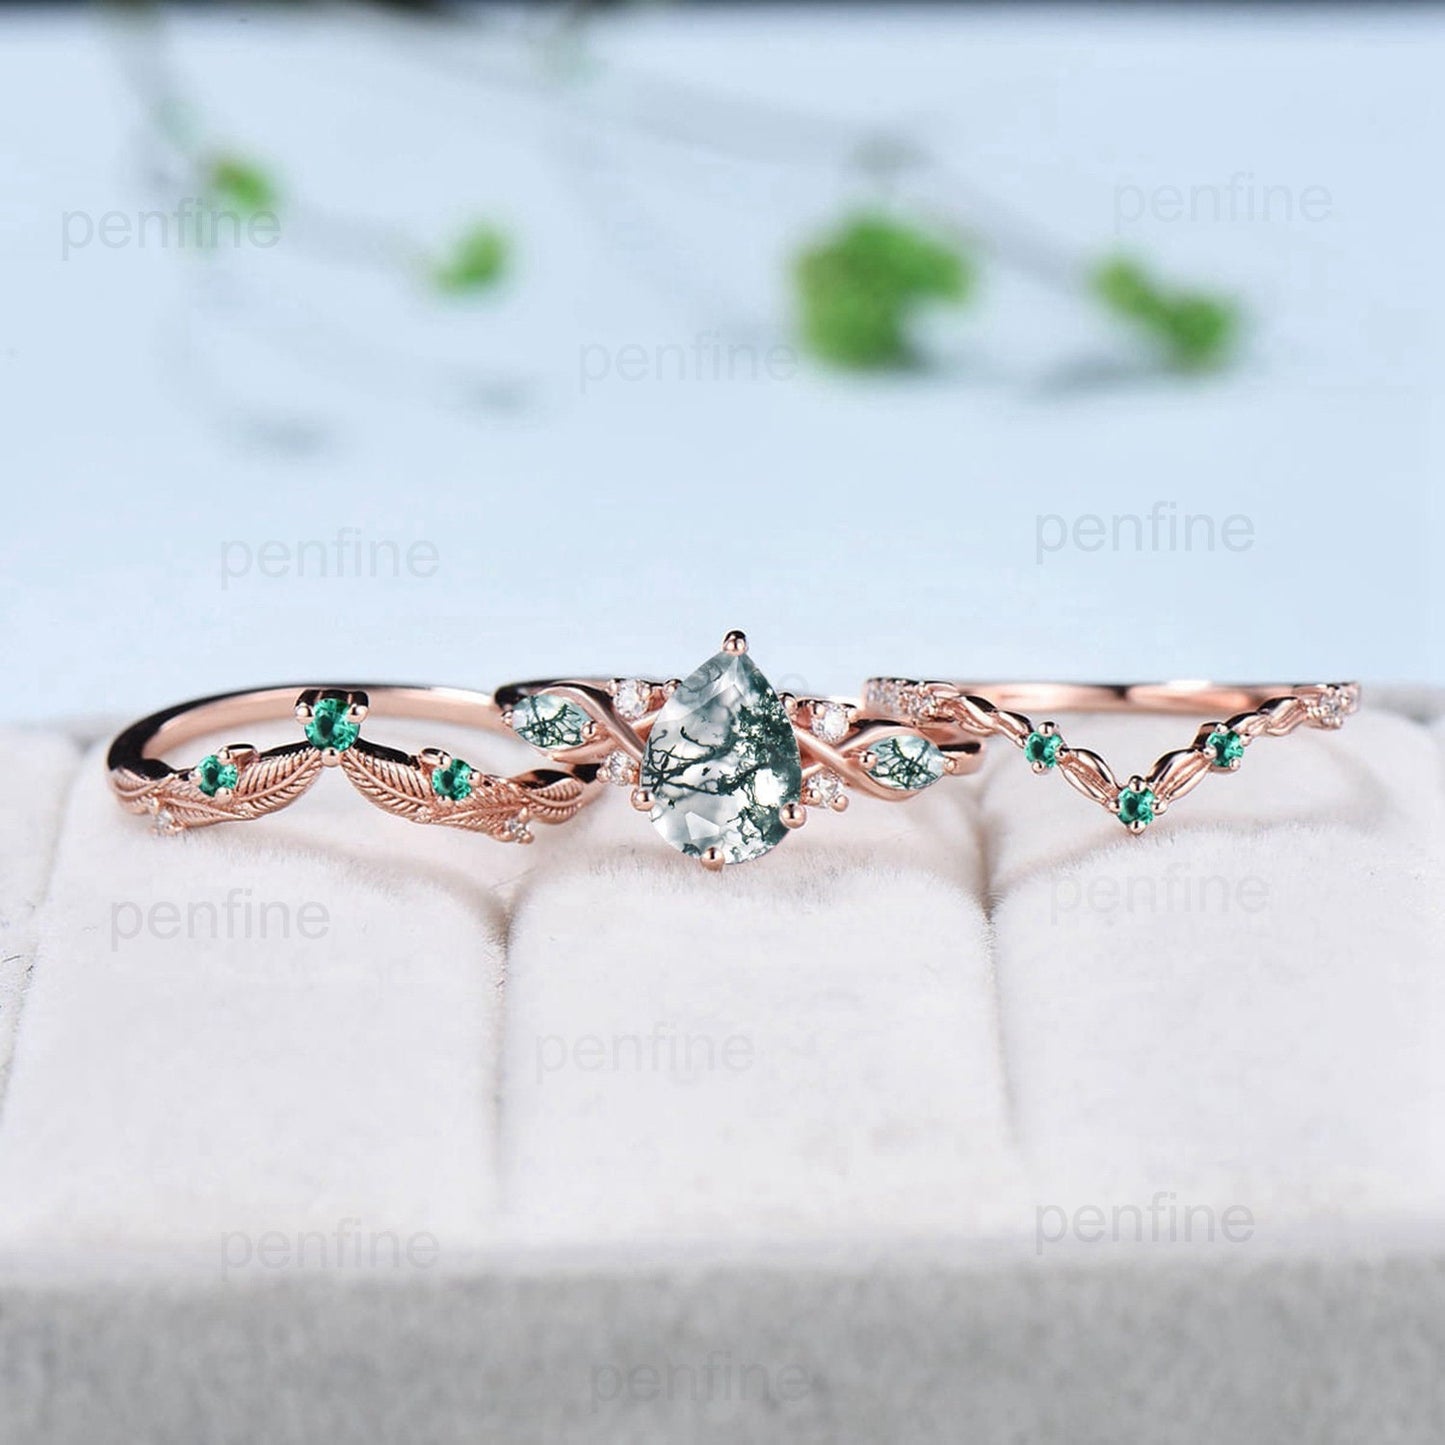 3pcs Moss Agate Ring Set Pear Shaped Natural Green Agate Engagement Ring Set Unique Rose Gold Leaf Vine Marquise Agate Wedding Ring Set - PENFINE